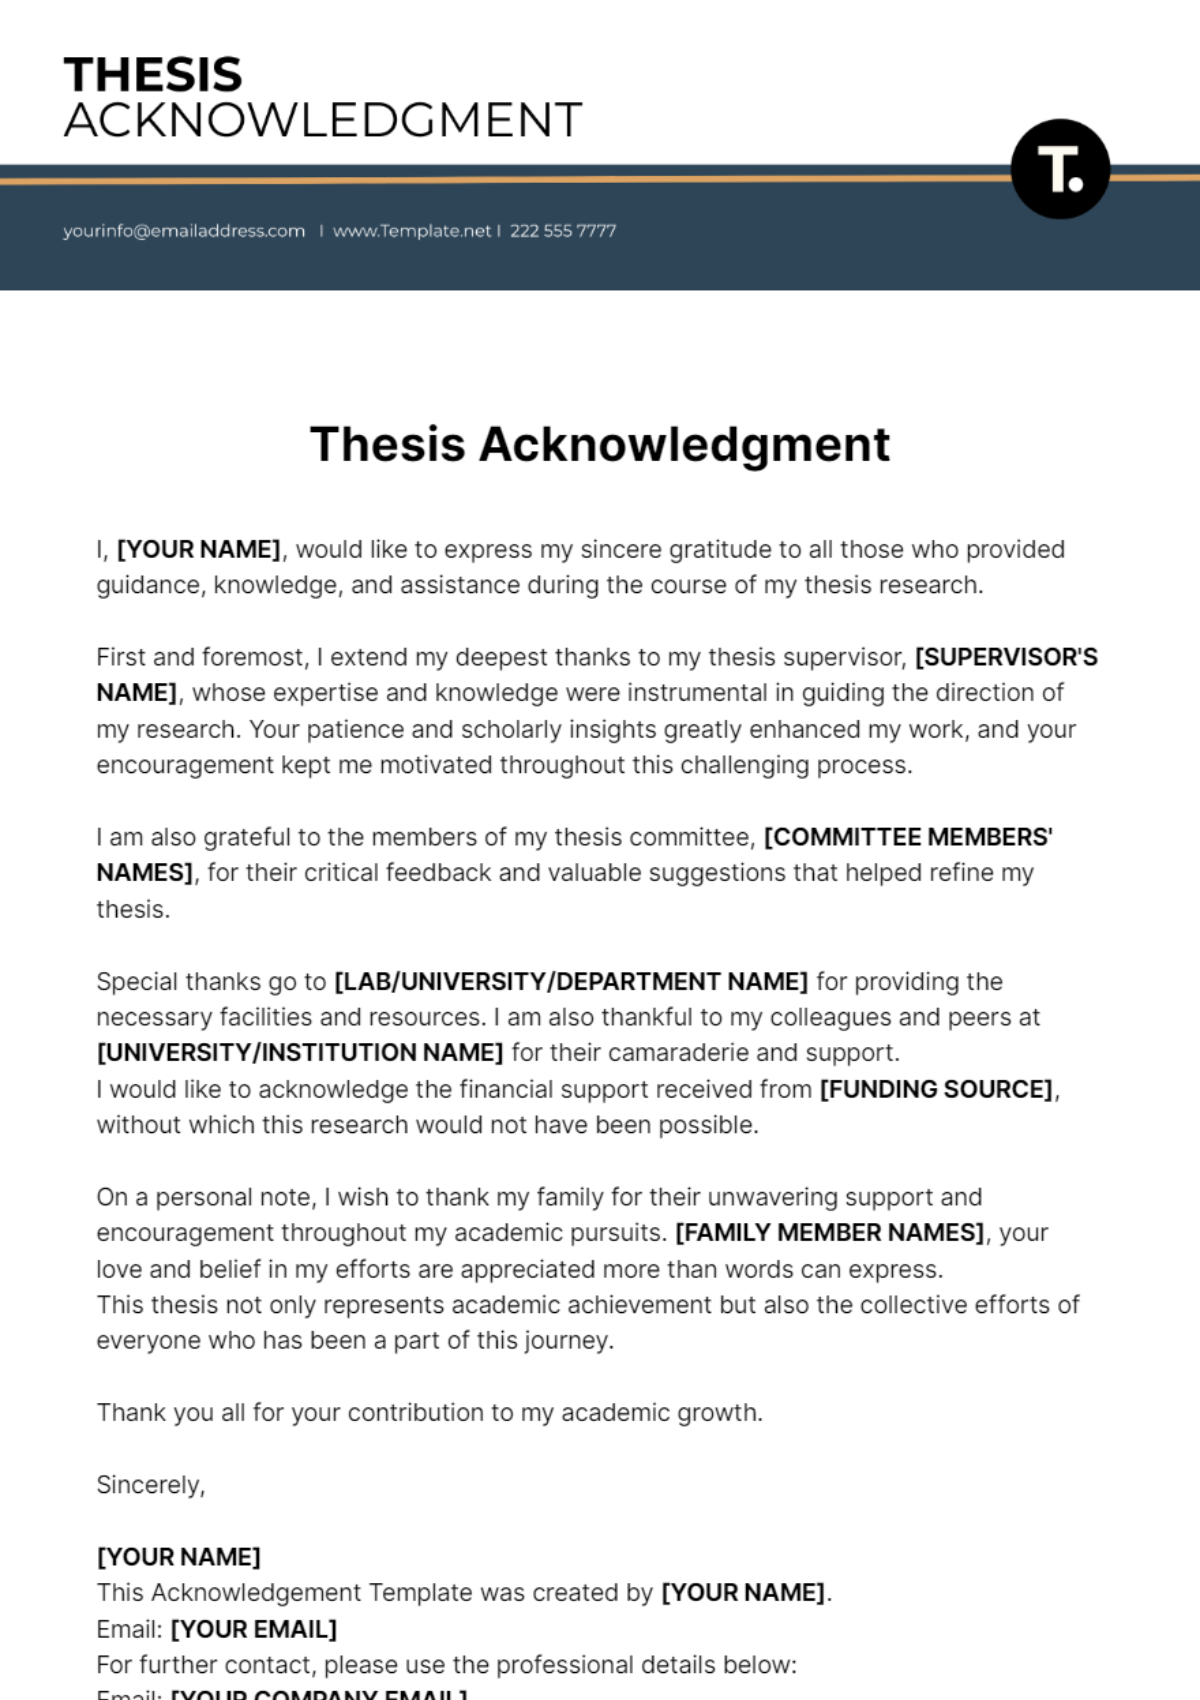 Thesis Acknowledgment Template